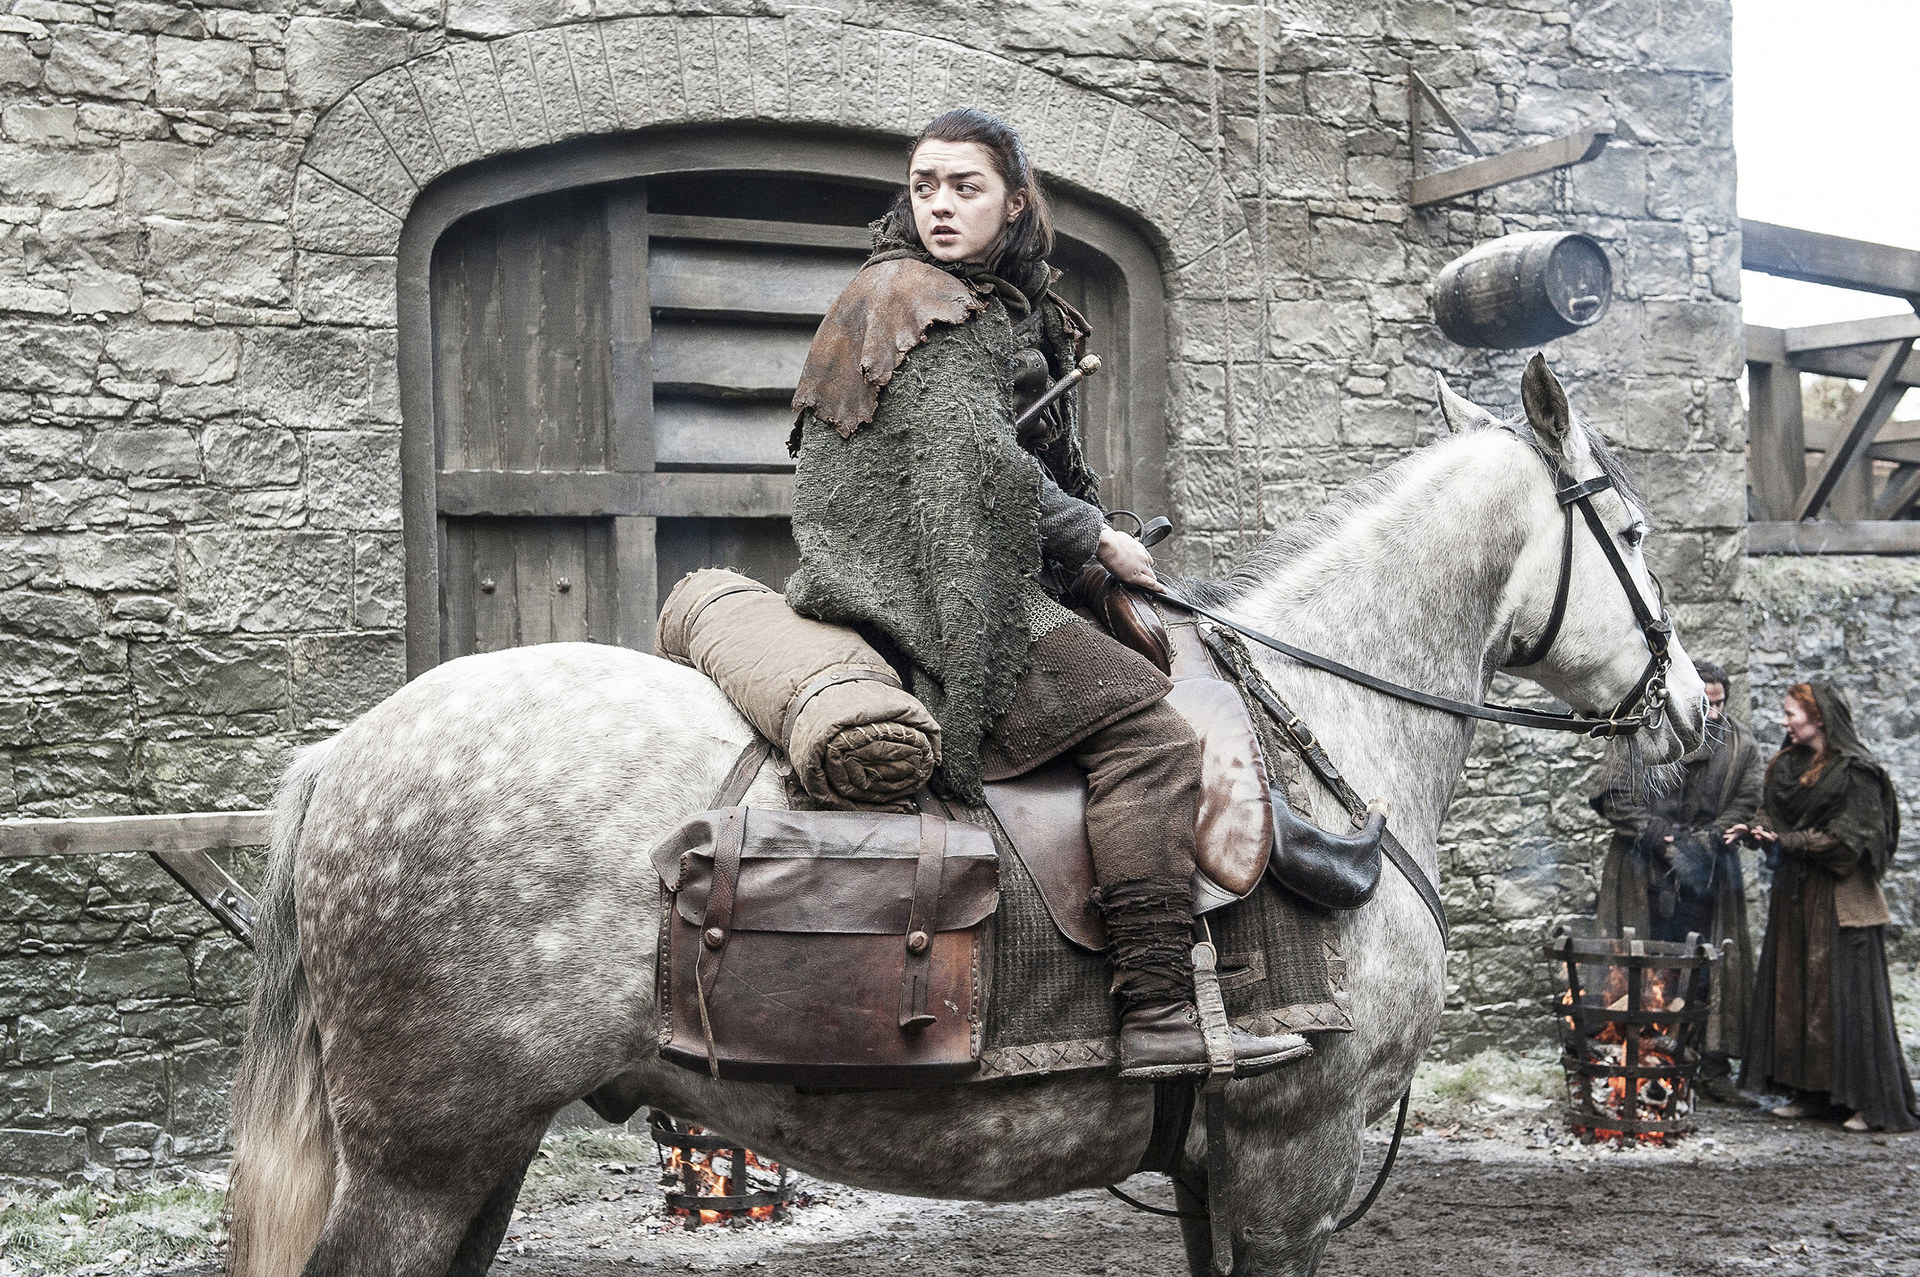 Maisie looks backwards while sitting on a horse